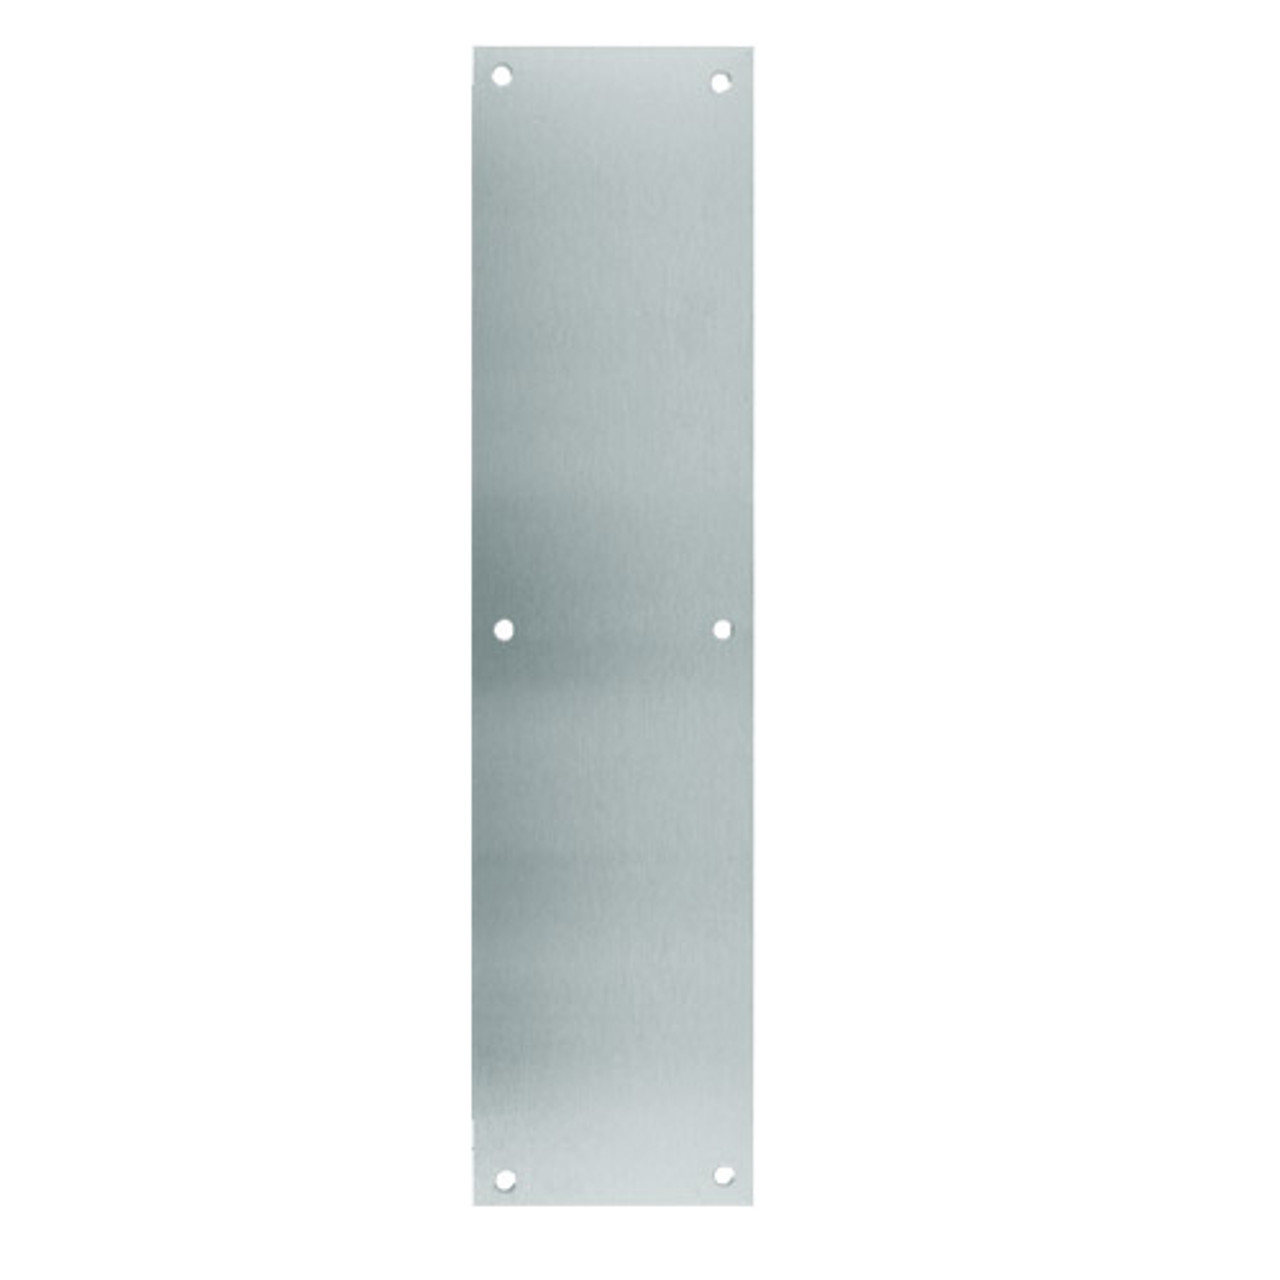 71-629 Don Jo 0.50 Push Plate in Bright Stainless Steel Finish